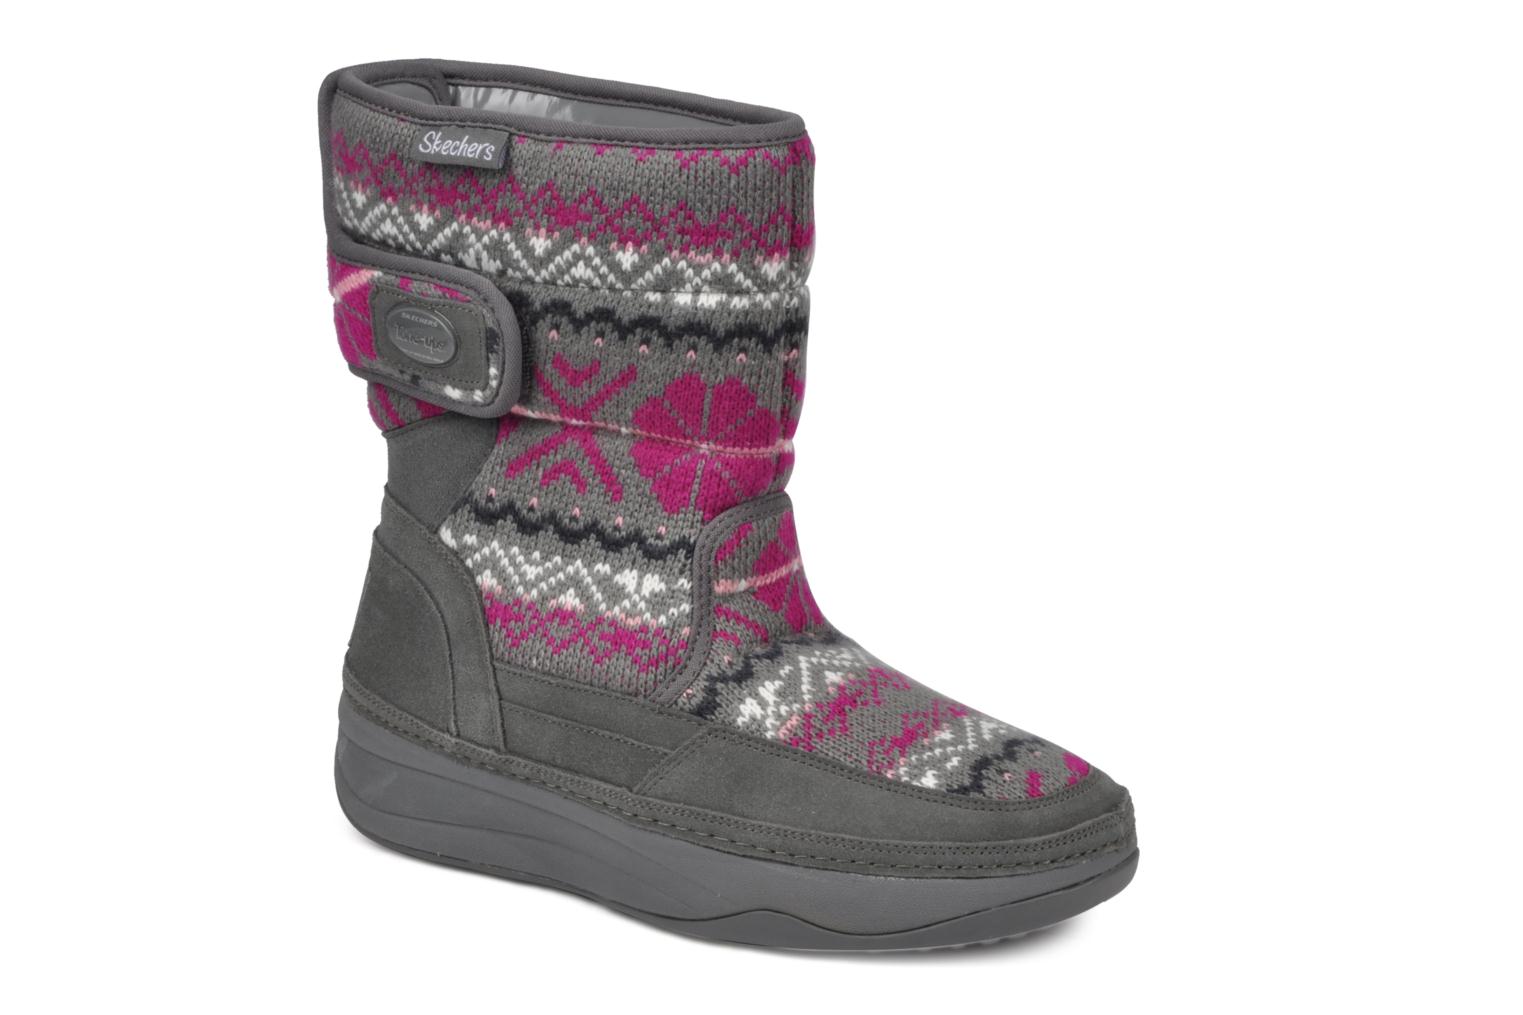 Foto Boots y Botines Tone-Ups Tone Ups Chalet Carve Mujer